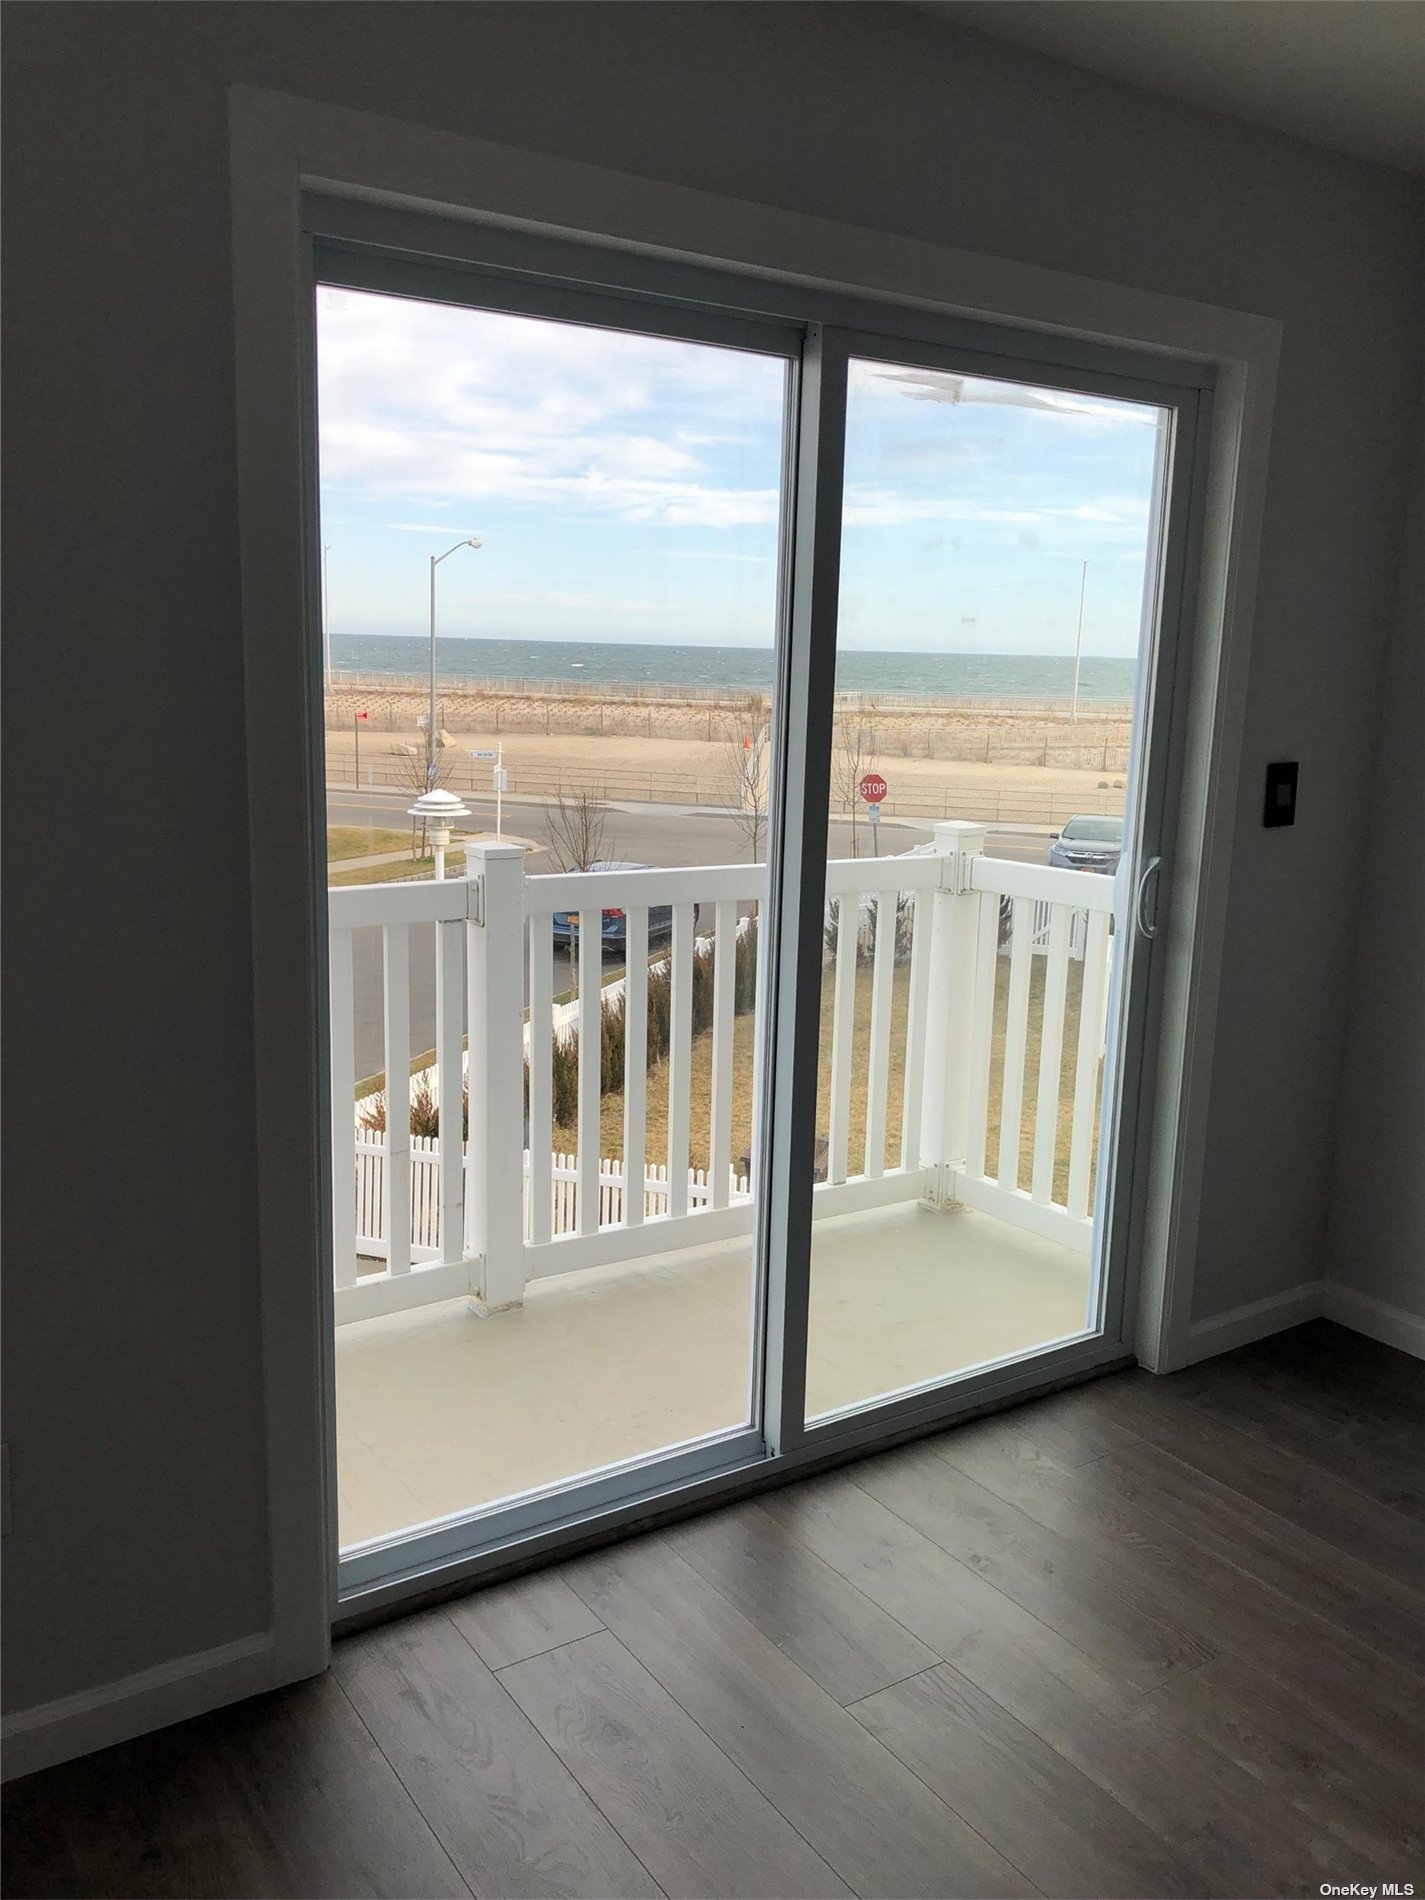 Apartment in Arverne - Beach  Queens, NY 11692